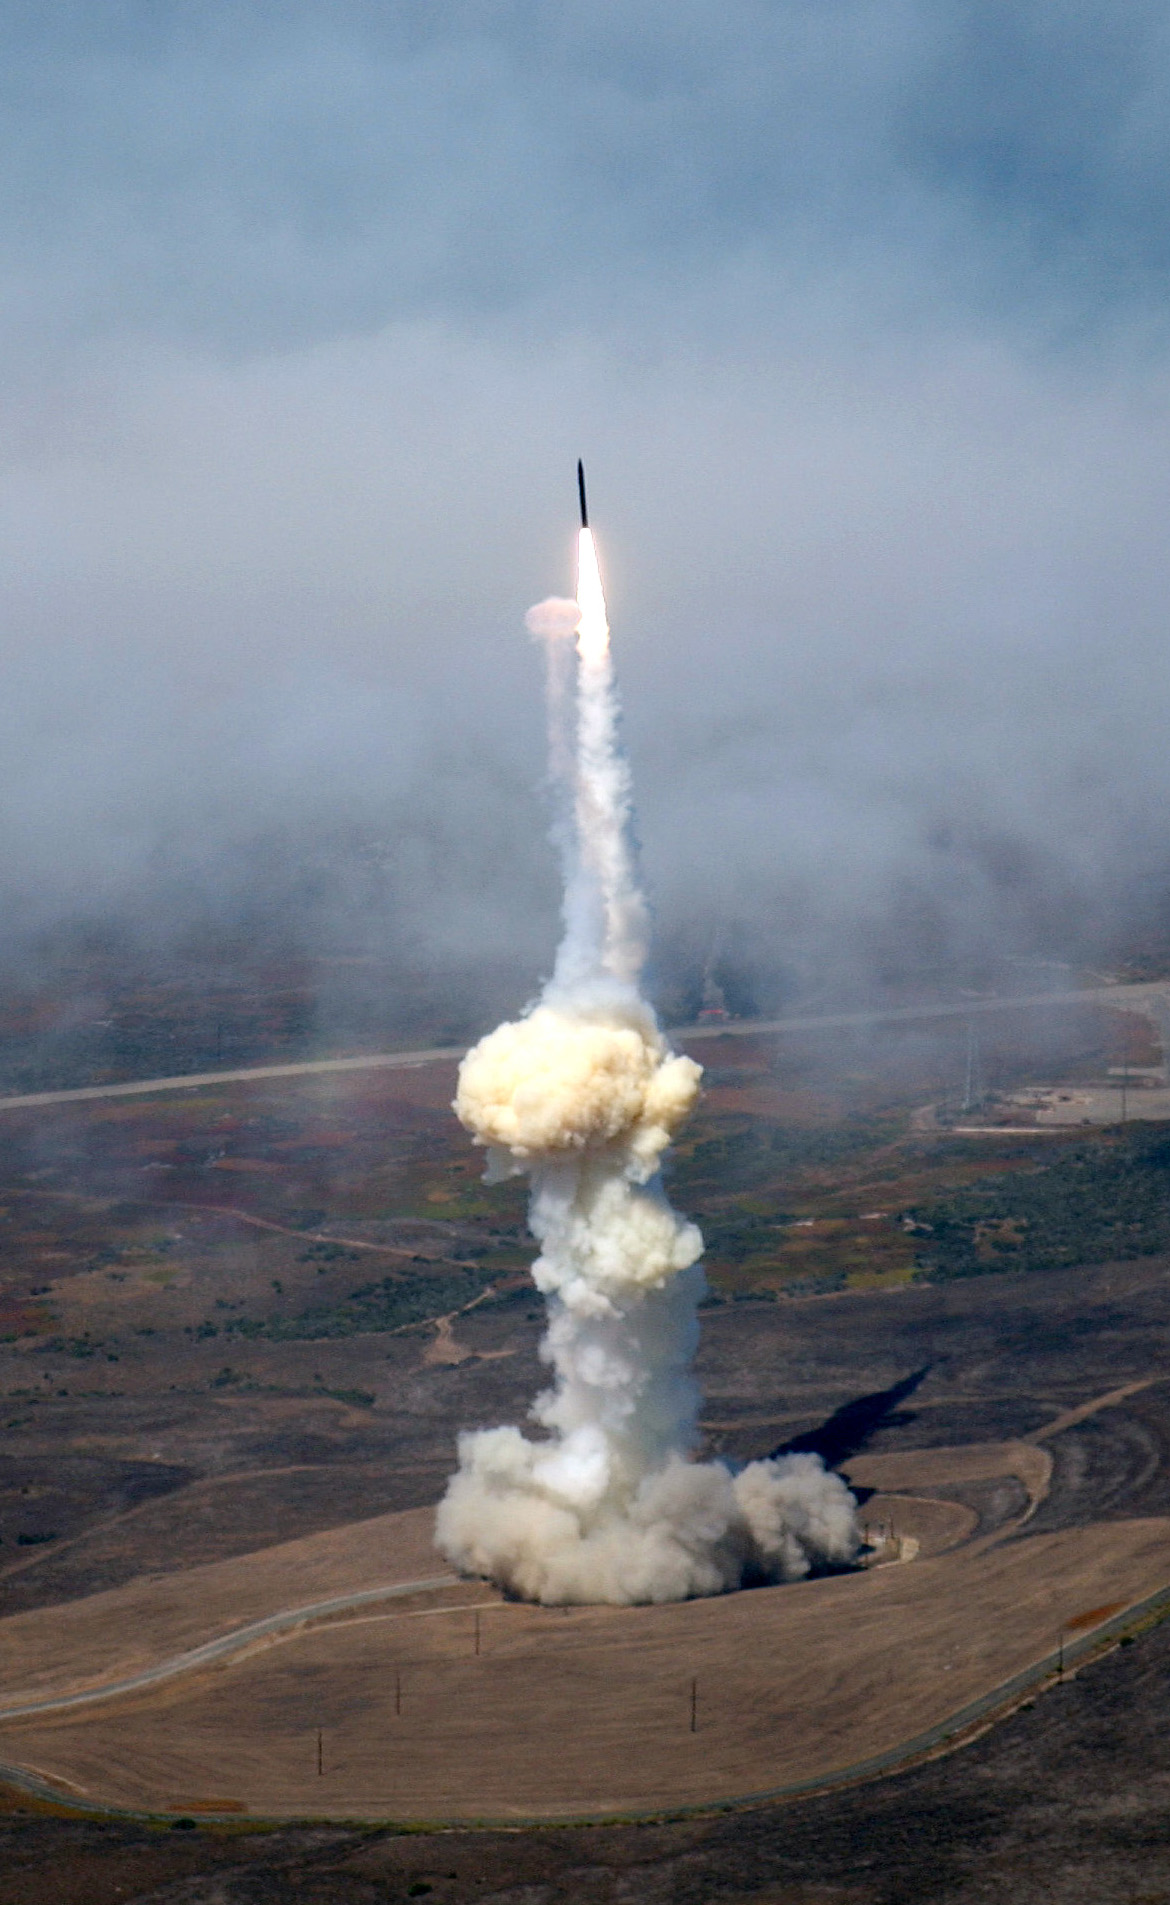 OBV-6 launch from LF23 at Vandenberg AFB, Ca